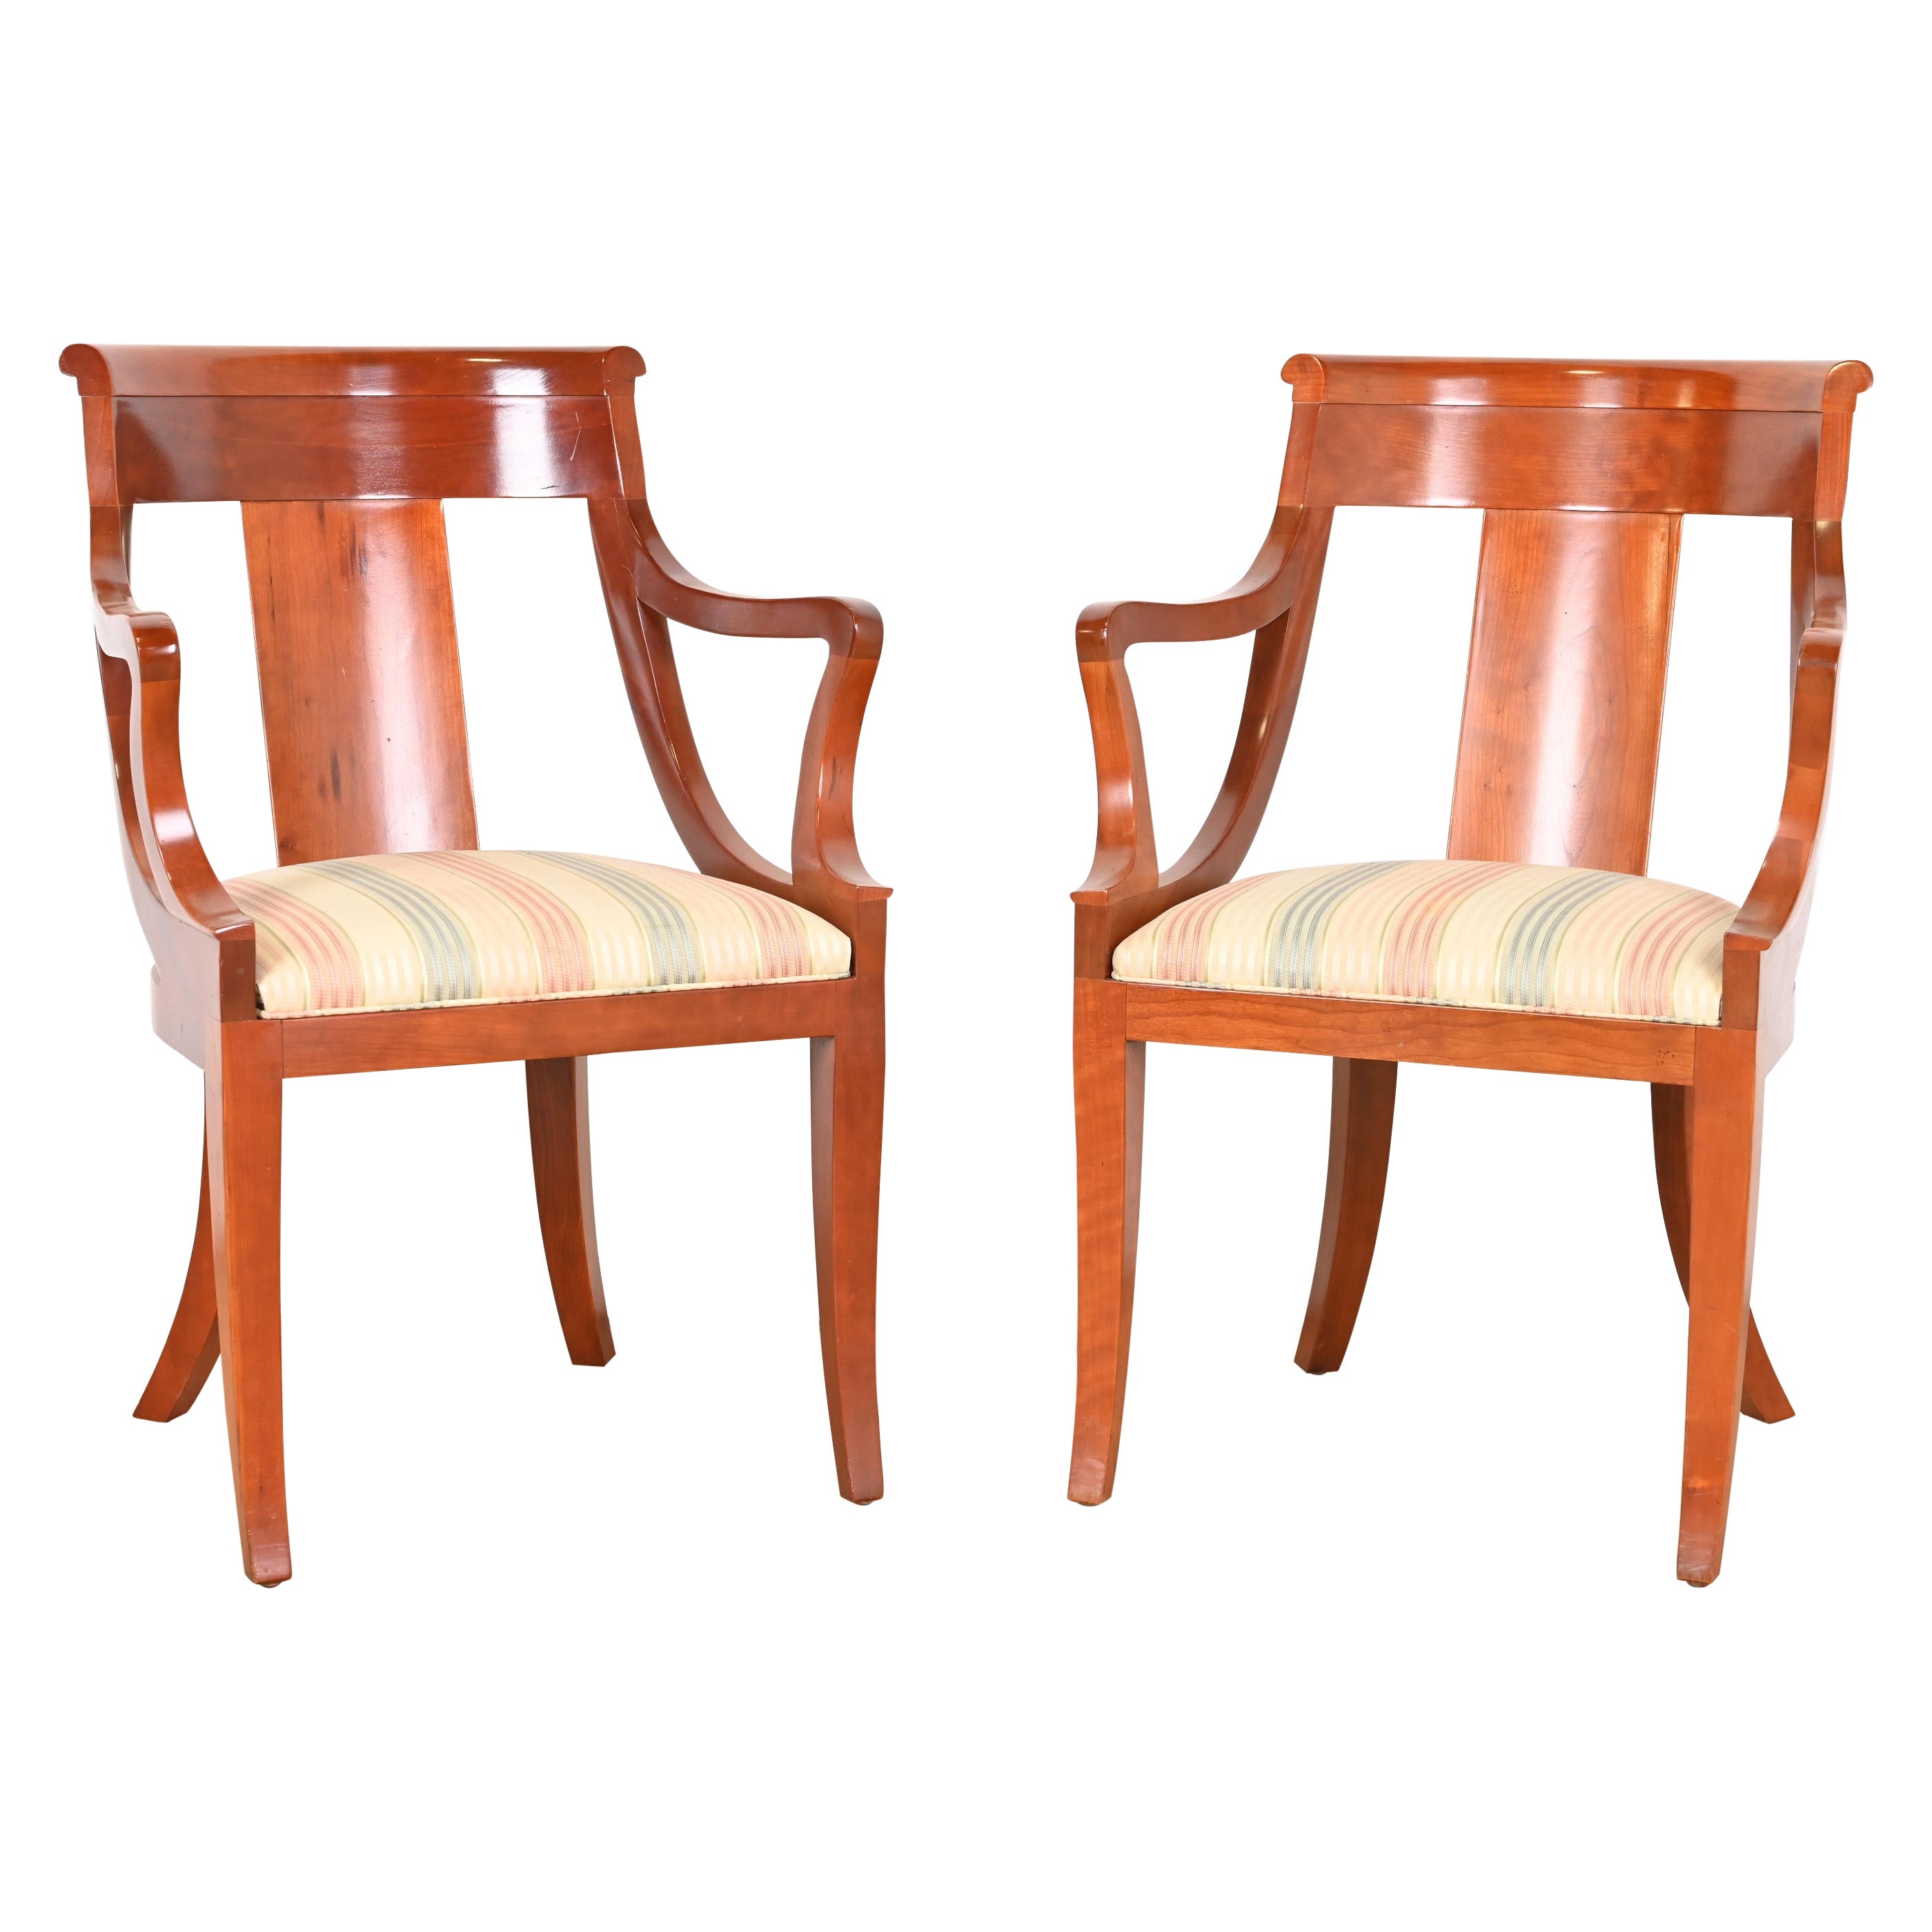 Baker Furniture Solid Cherry Wood Regency Arm Chairs, Pair For Sale